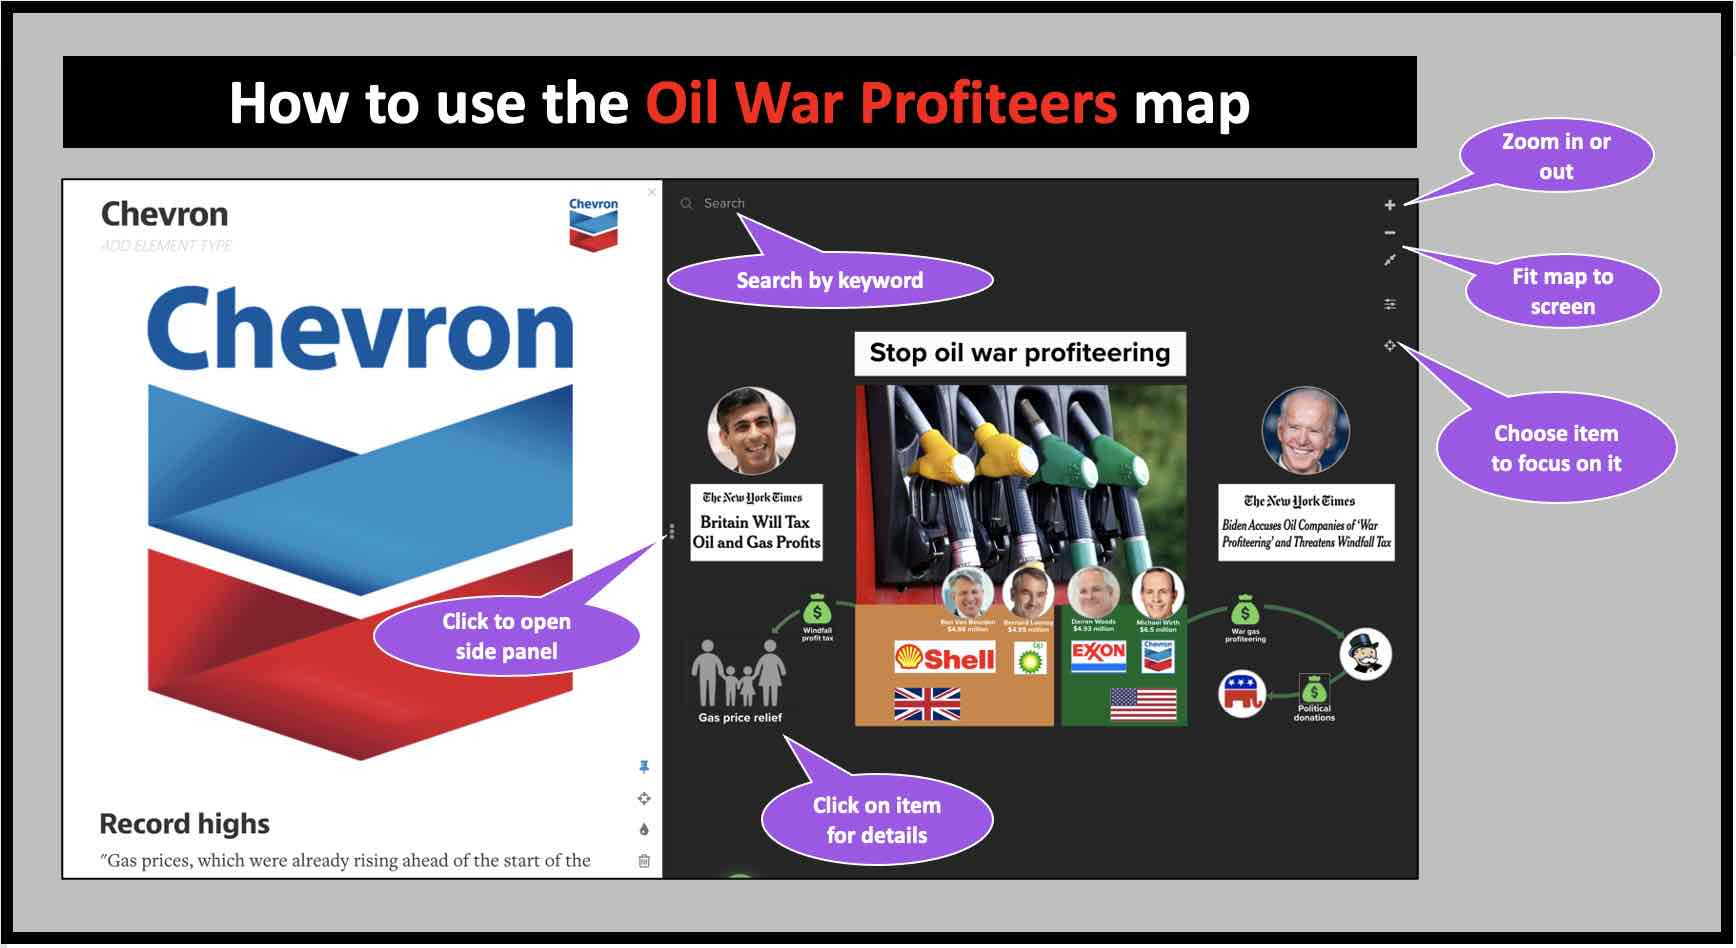 Follow the money behind oil company war profiteering with this map